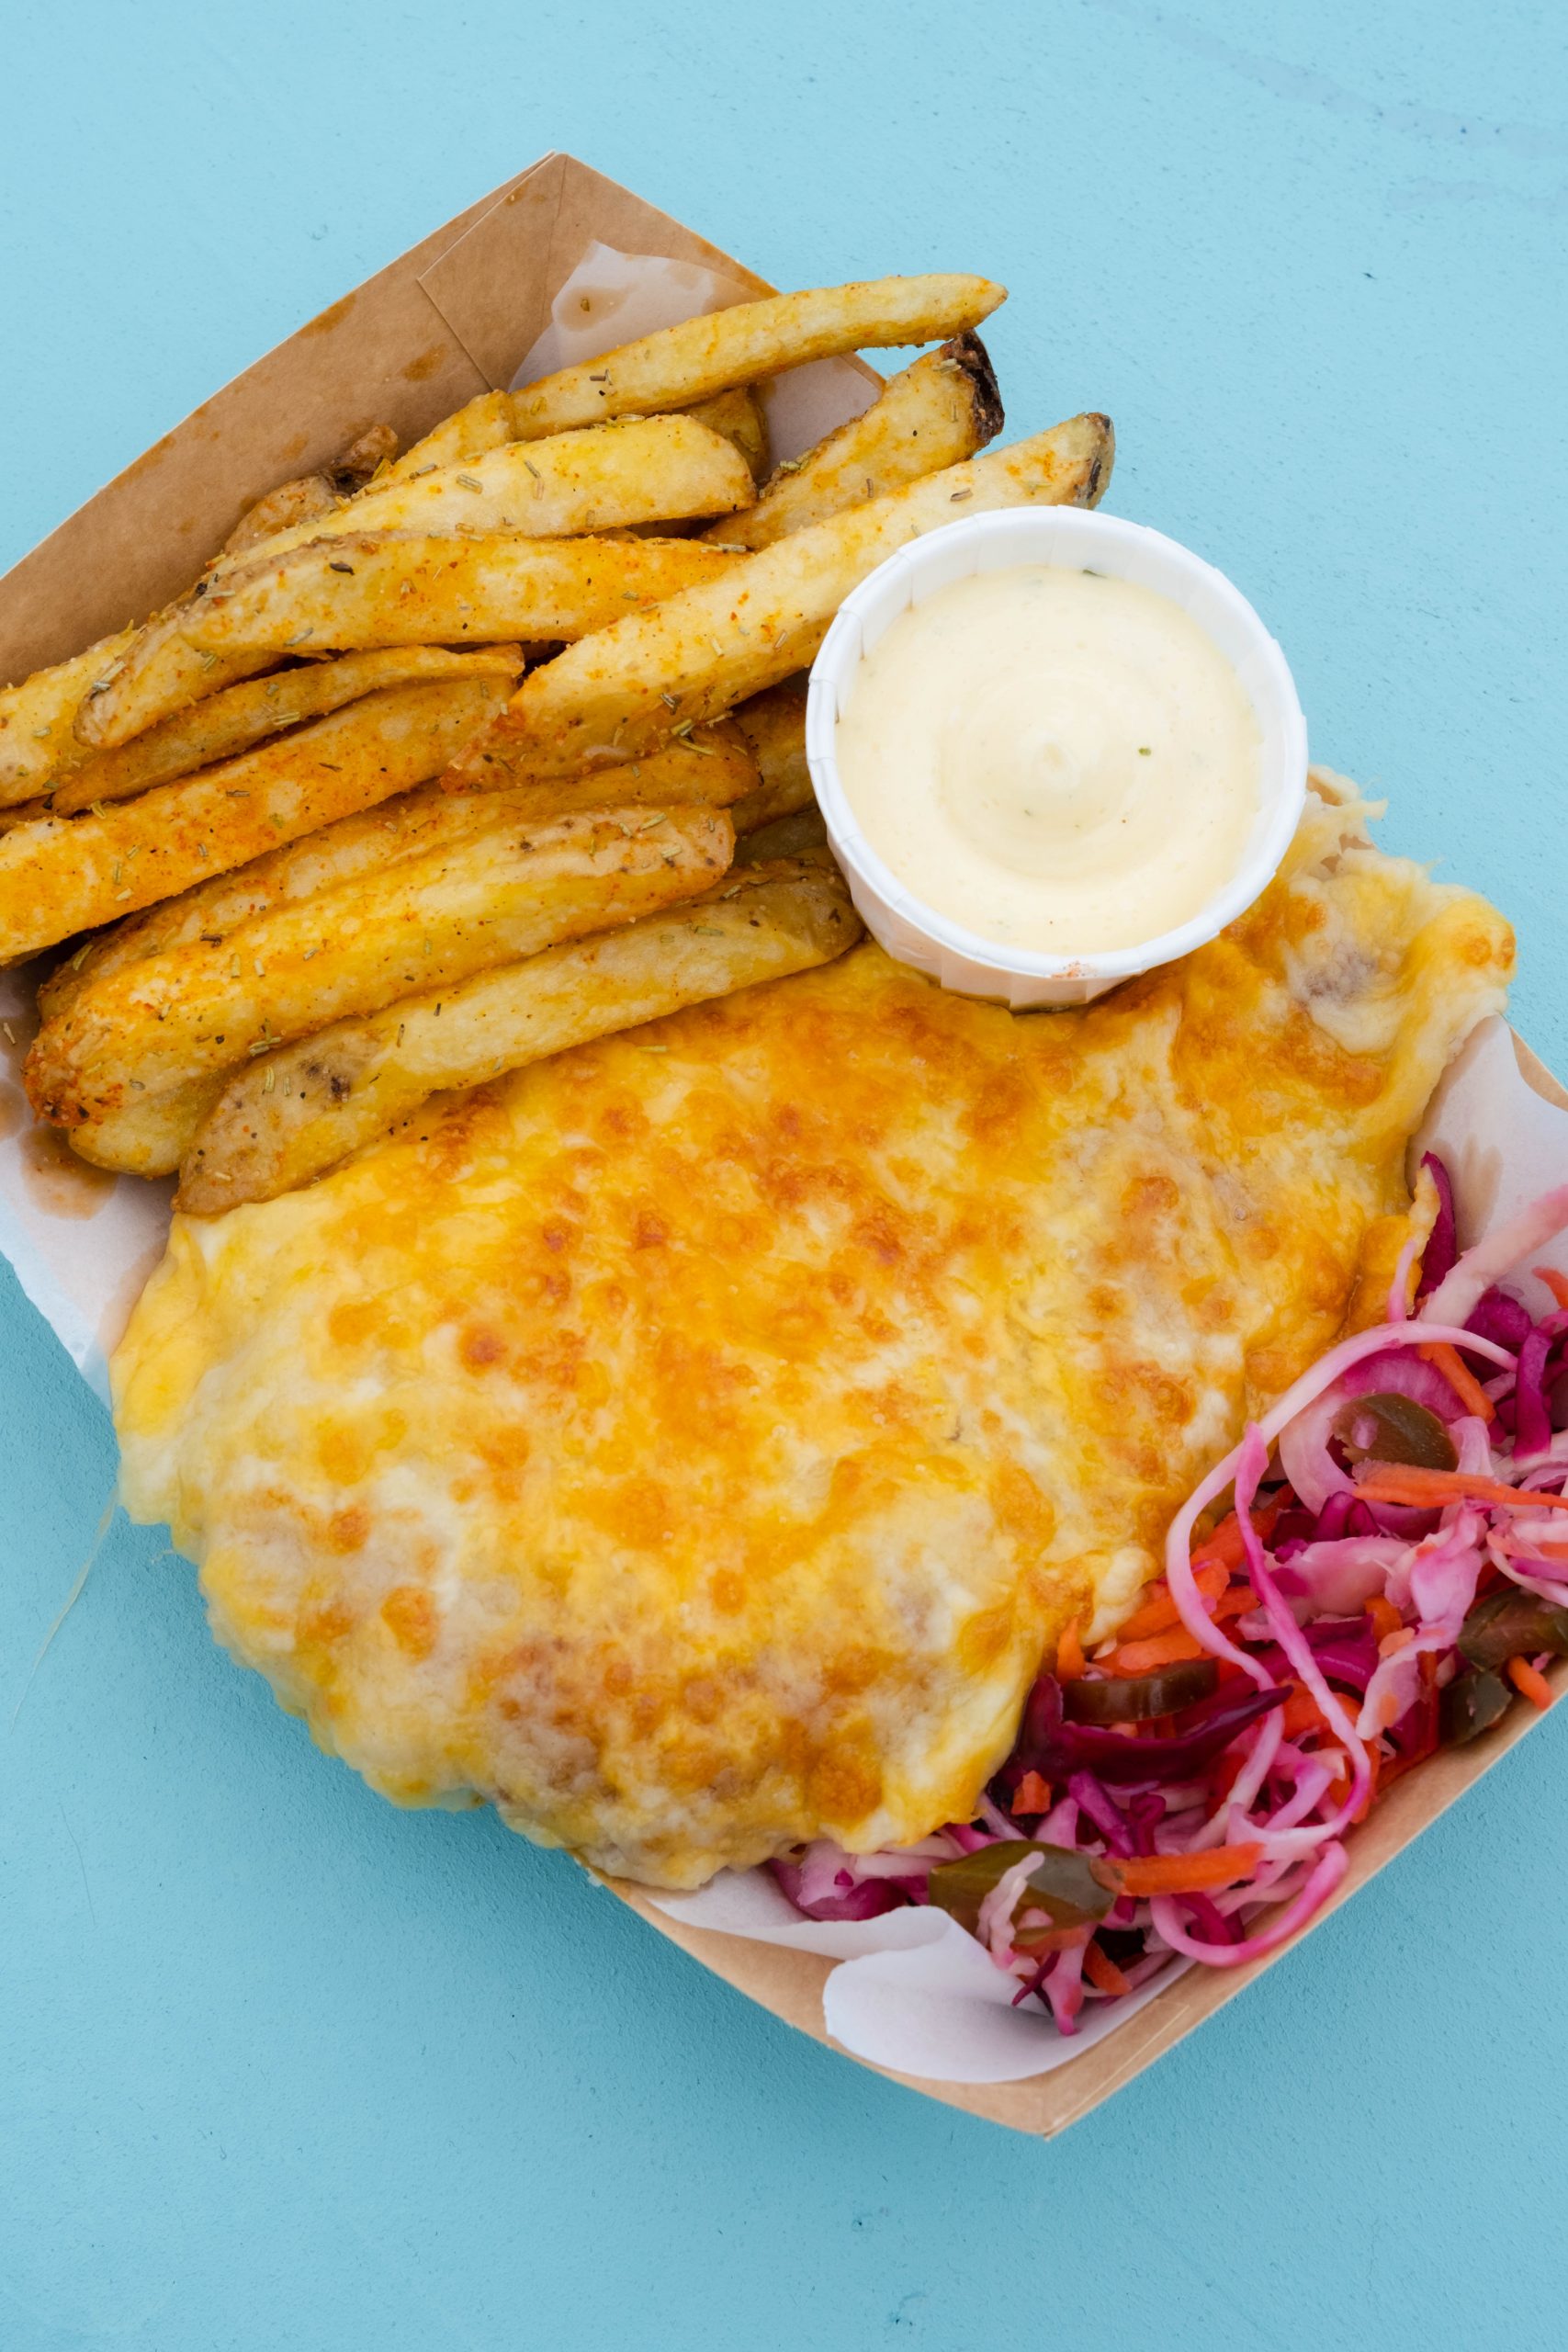 Image shows a Chicken Parmo with chips and a side salad